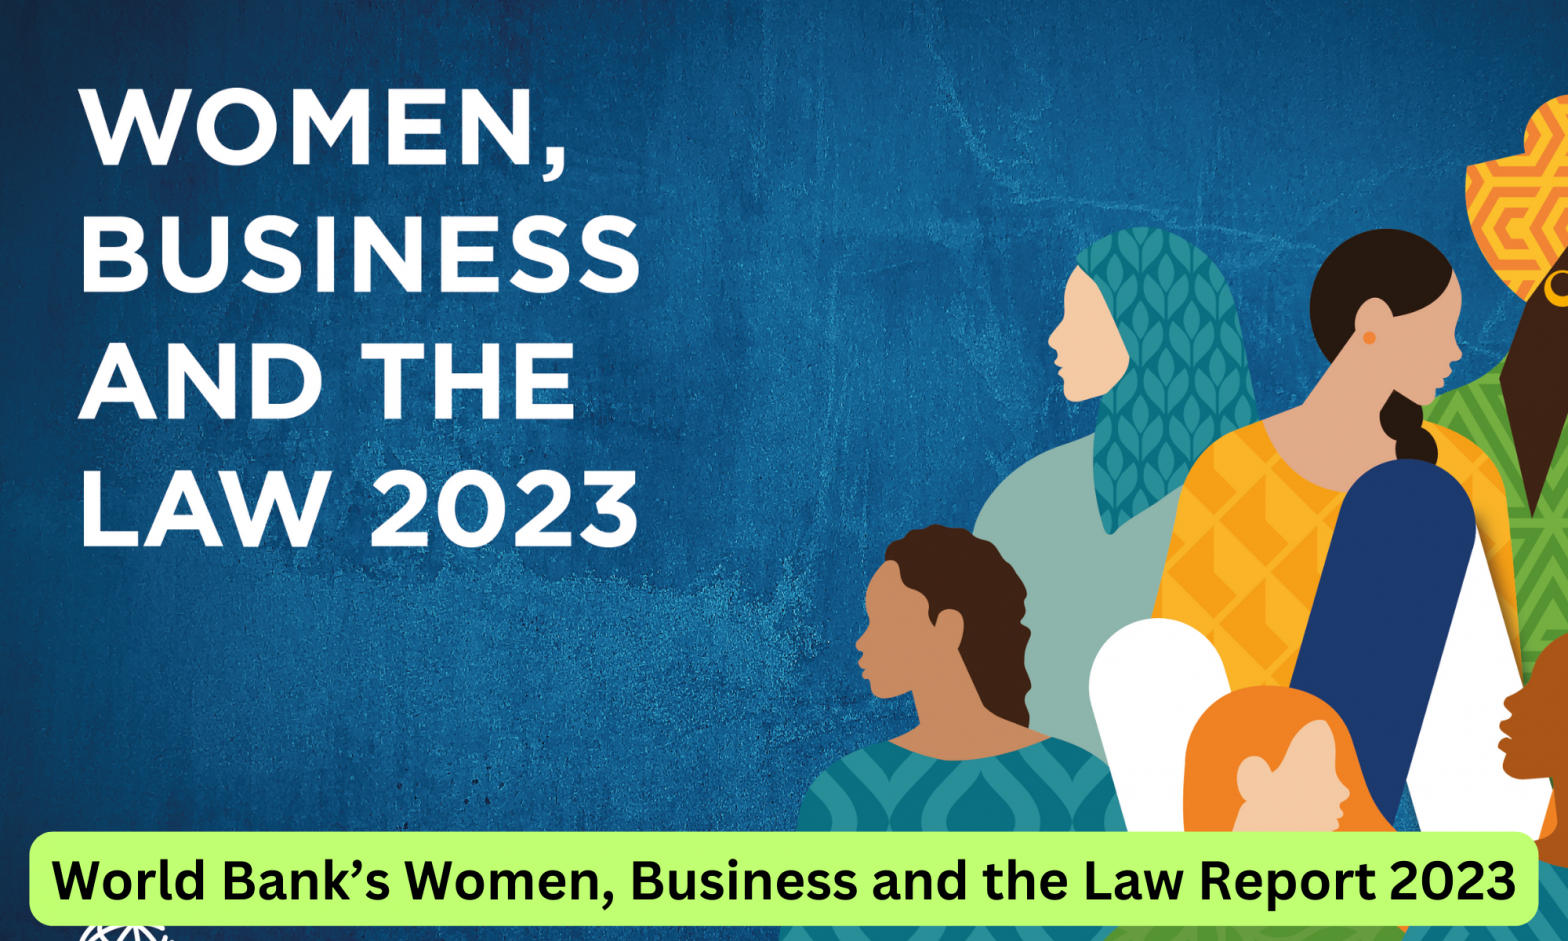 World Bank’s Women, Business and the Law Report 2023